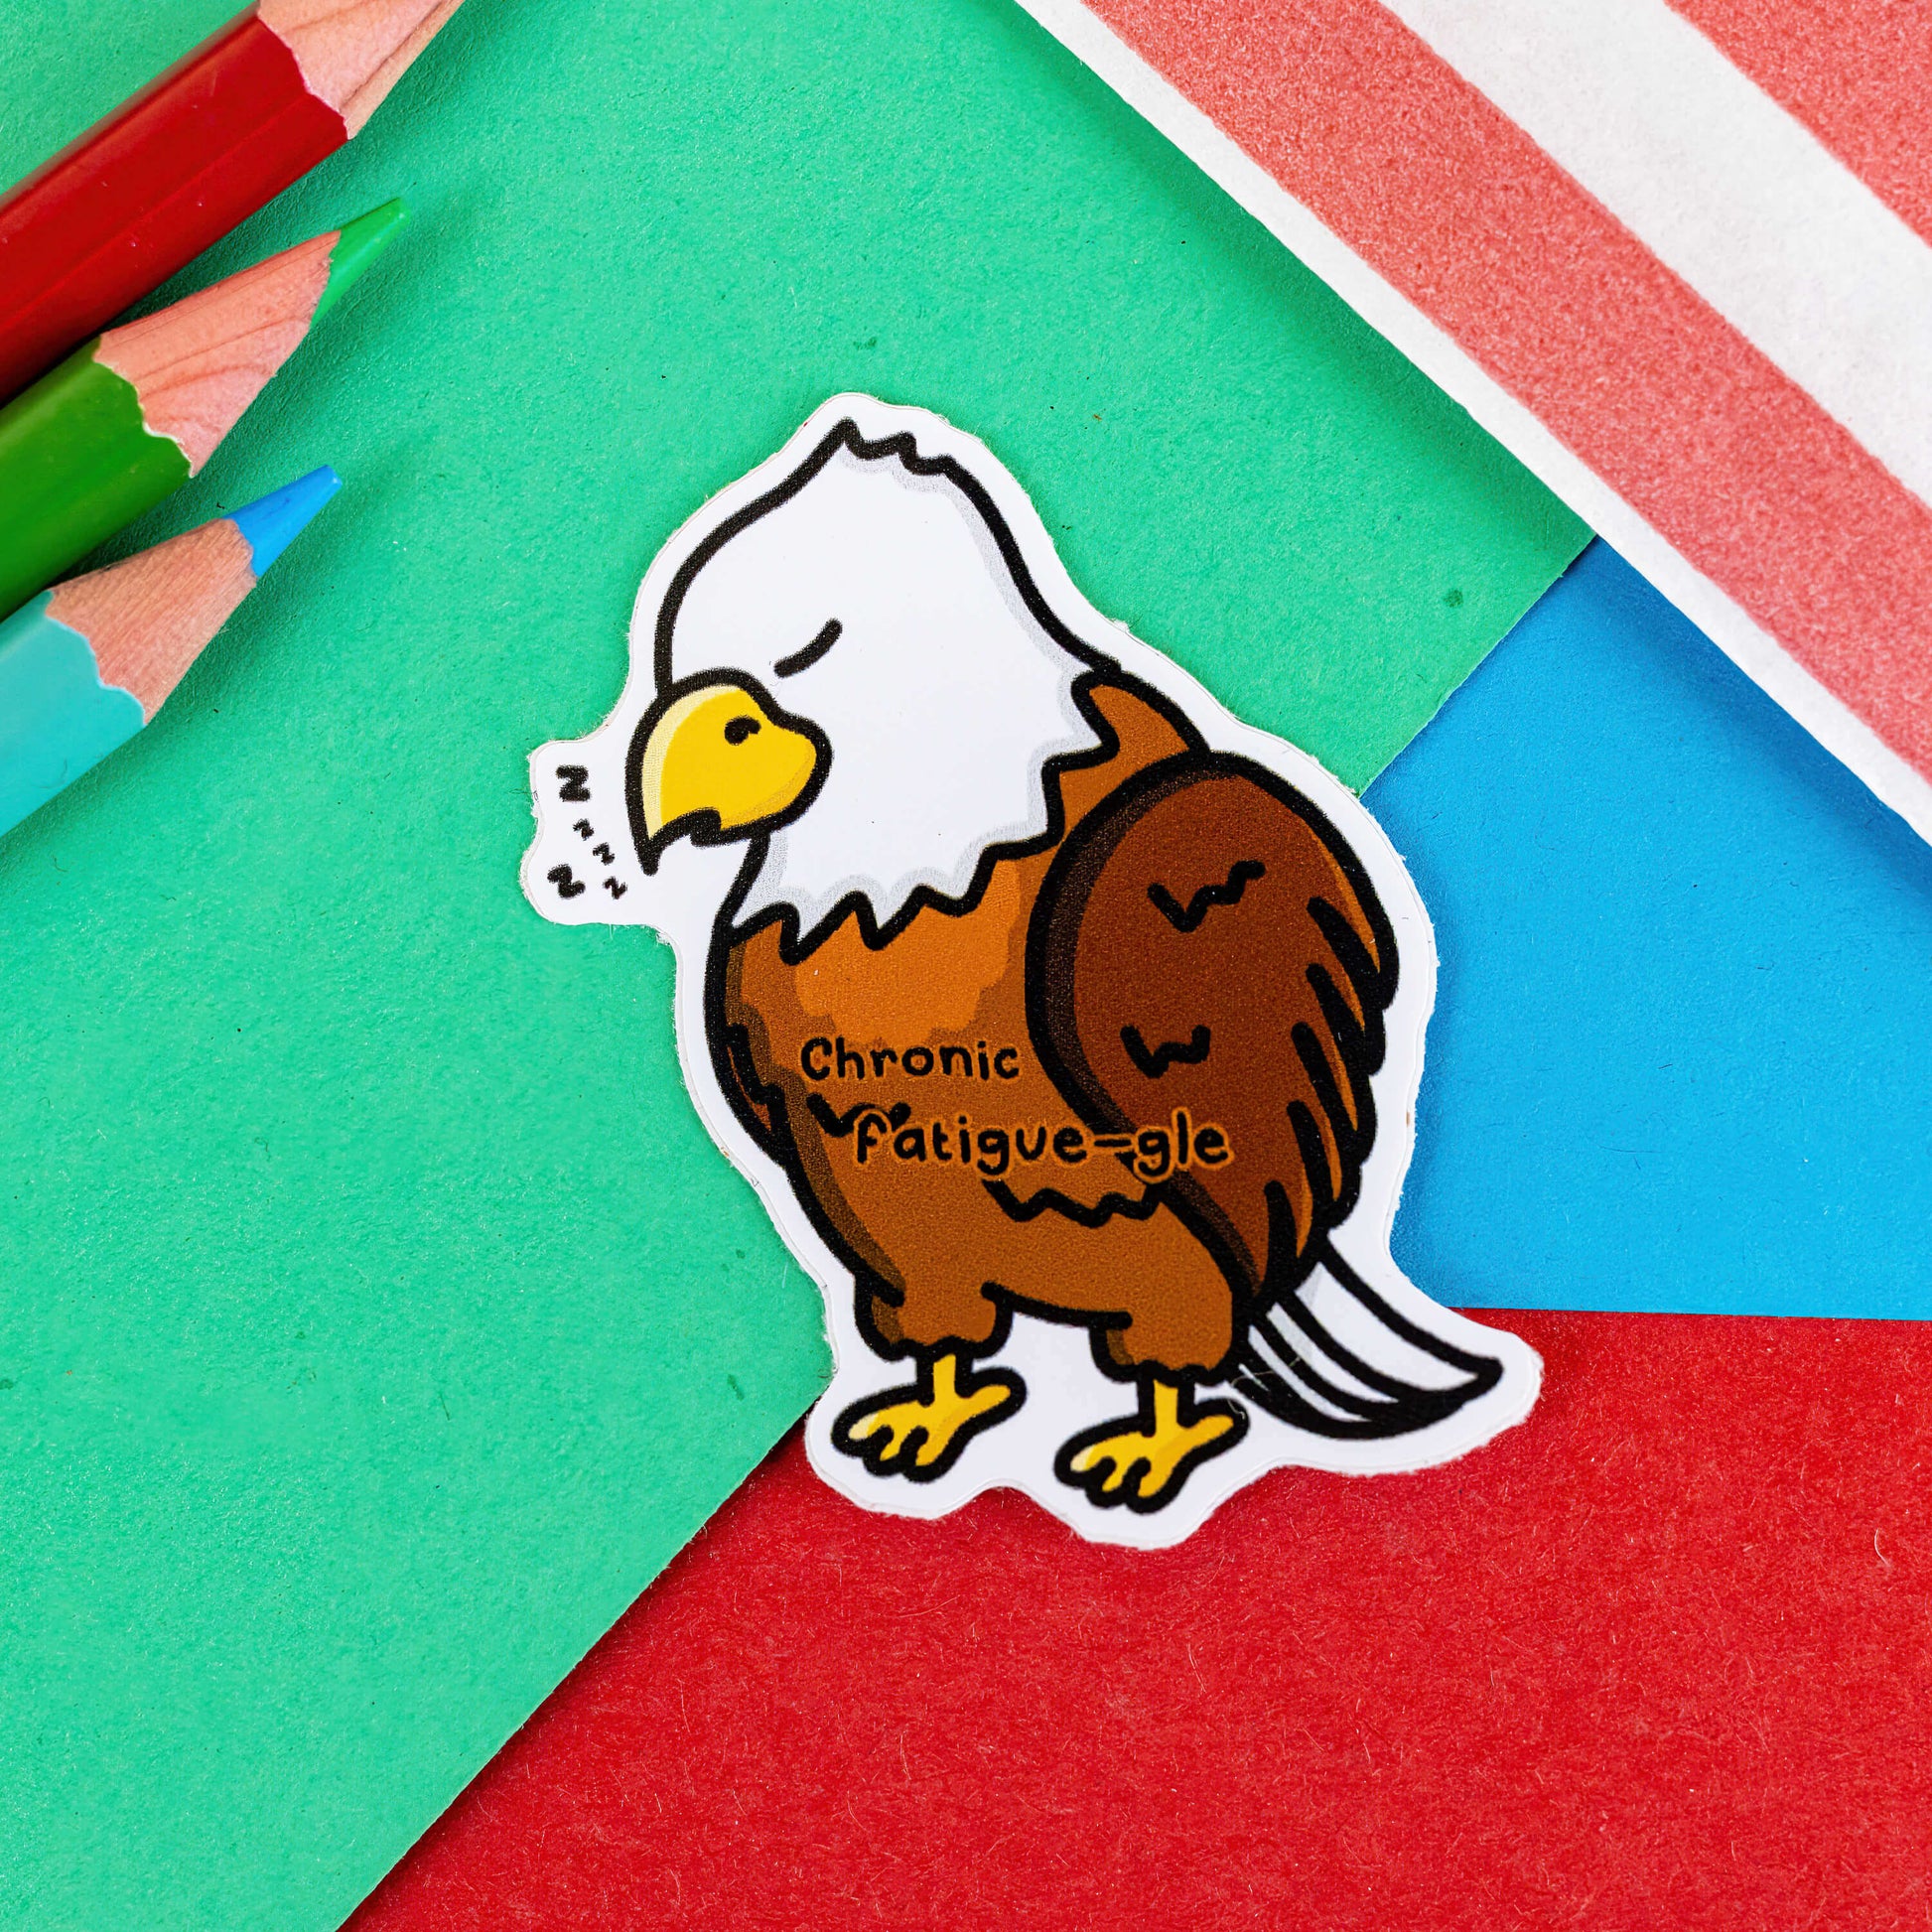 The Chronic Fatigue-le Sticker - Chronic Fatigue on a red, blue and green background with colouring pencils and a red stripe candy bag. The sticker is a sleeping tired brown and white eagle with a yellow beak and feet, across the middle in black text reads 'chronic fatigue-gle'. The design was created to raise awareness for chronic fatigue / ME / CFS.